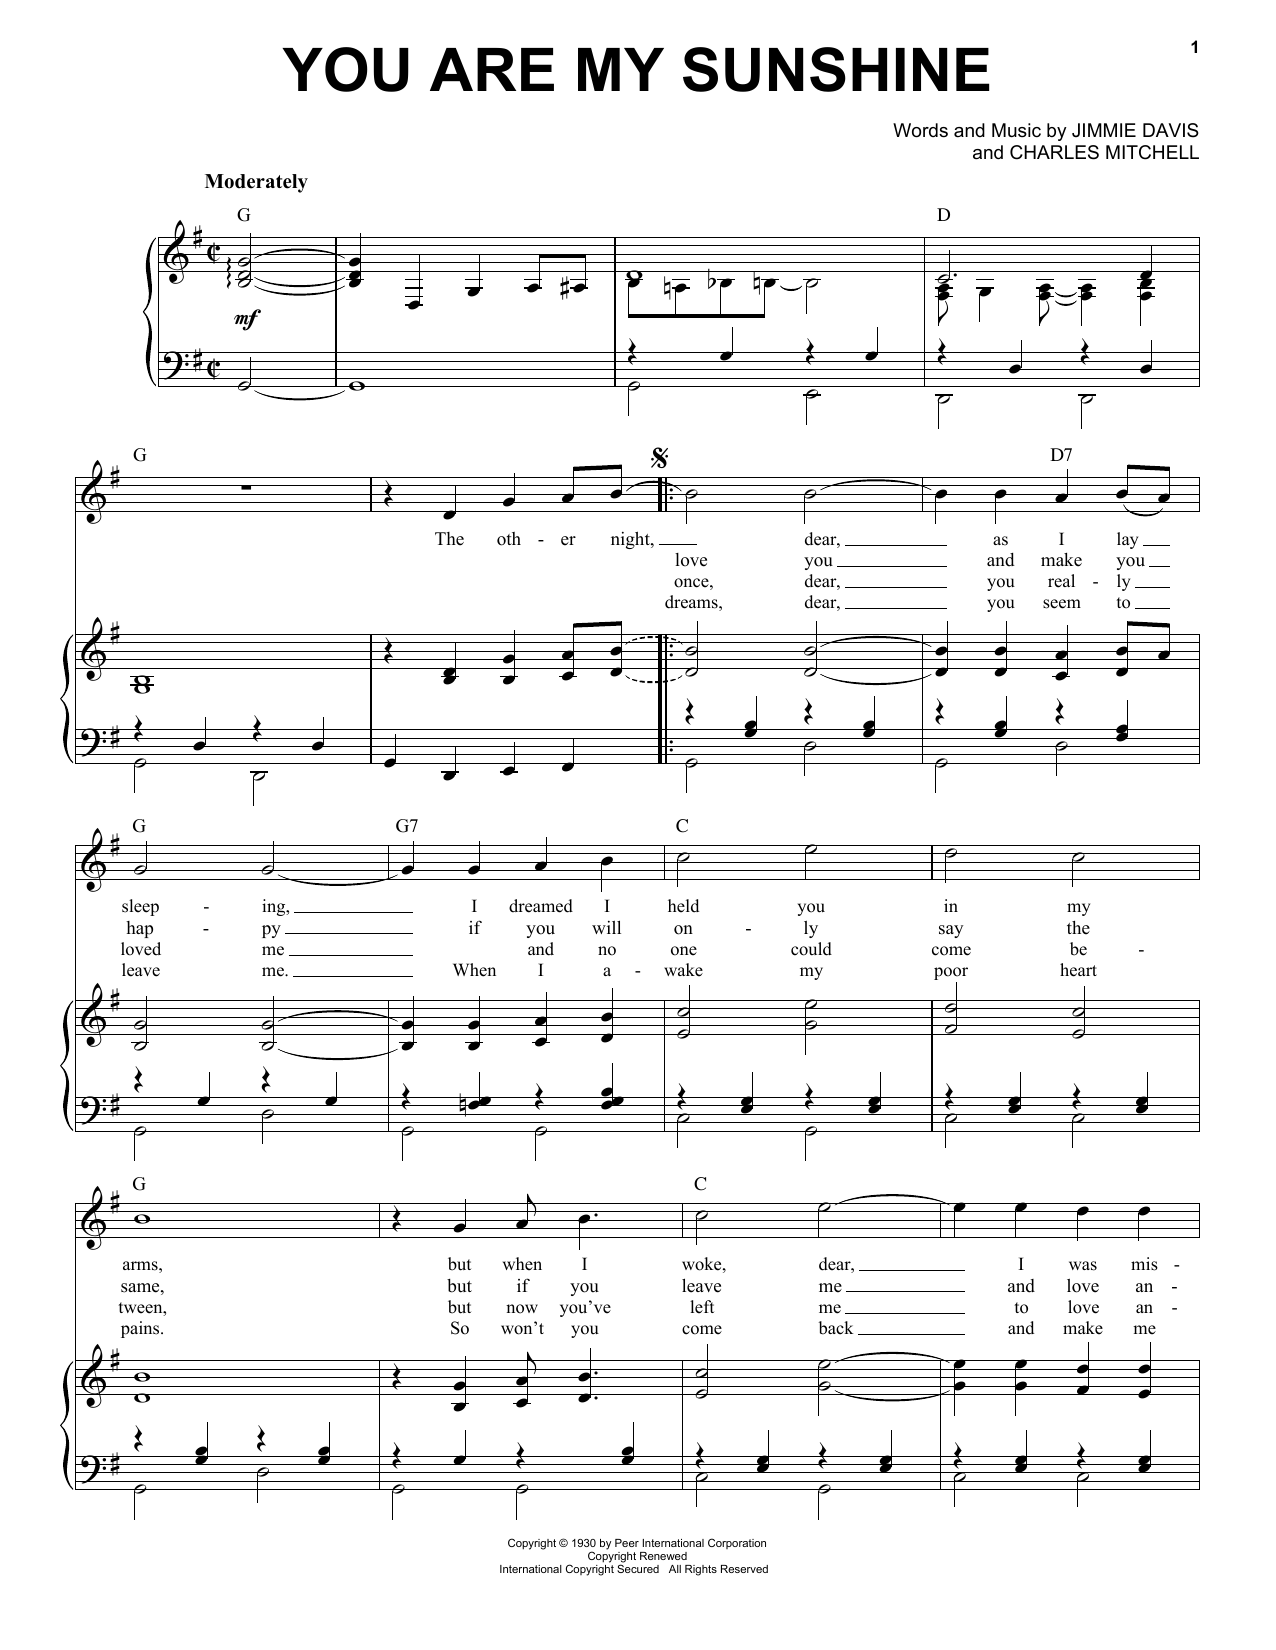 Norman Blake You Are My Sunshine sheet music notes and chords. Download Printable PDF.